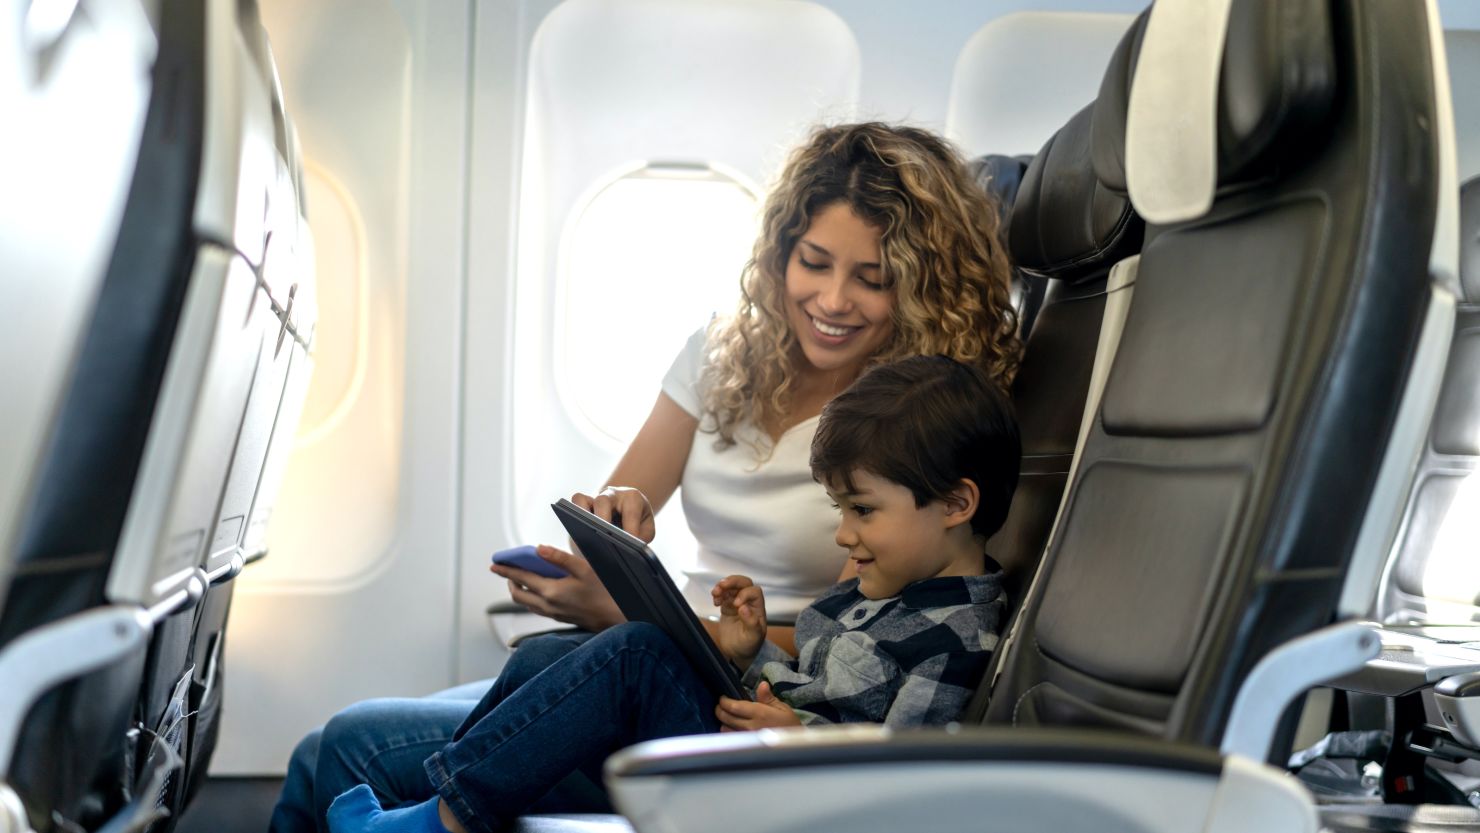 Fun Apps for Keeping Everyone Happy During Holiday Travel